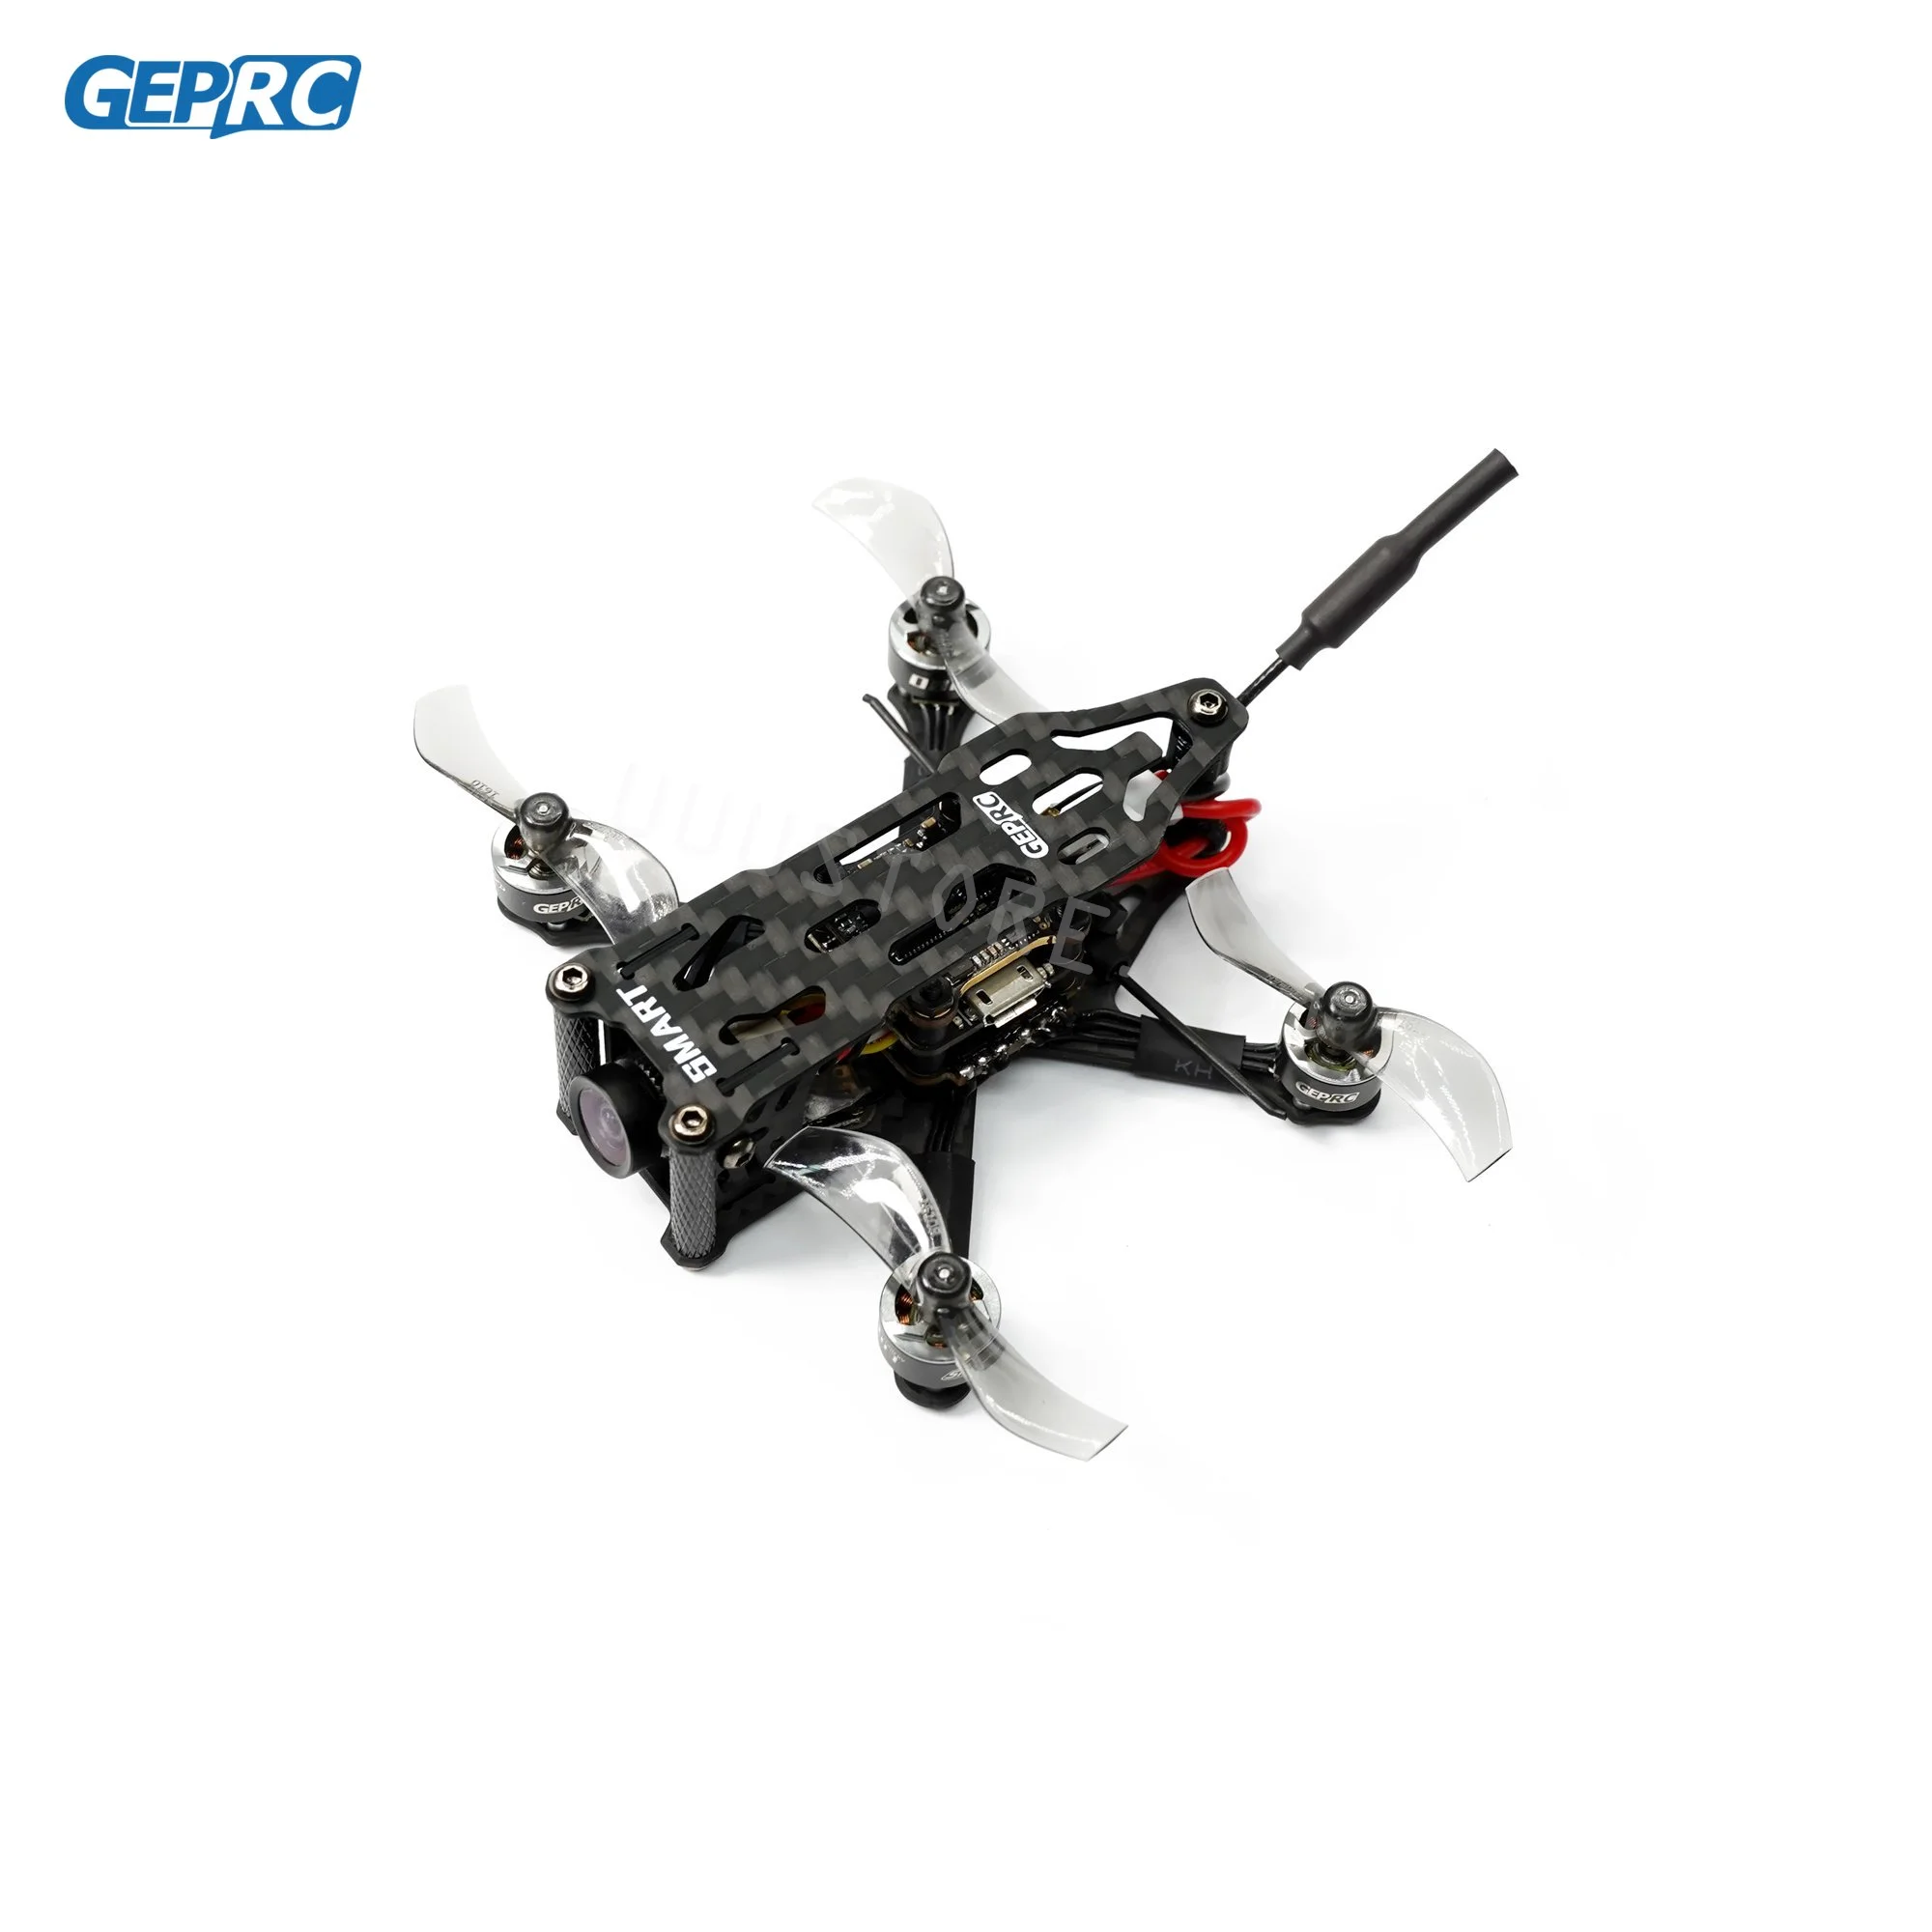 

GEPRC SMART16 78mm 2S Freestyle Analog FPV Racing Drone Caddx Ant Camera F411 FC 12A 4IN1 ESC 200mW VTX ELRS Receiver Quadcopter